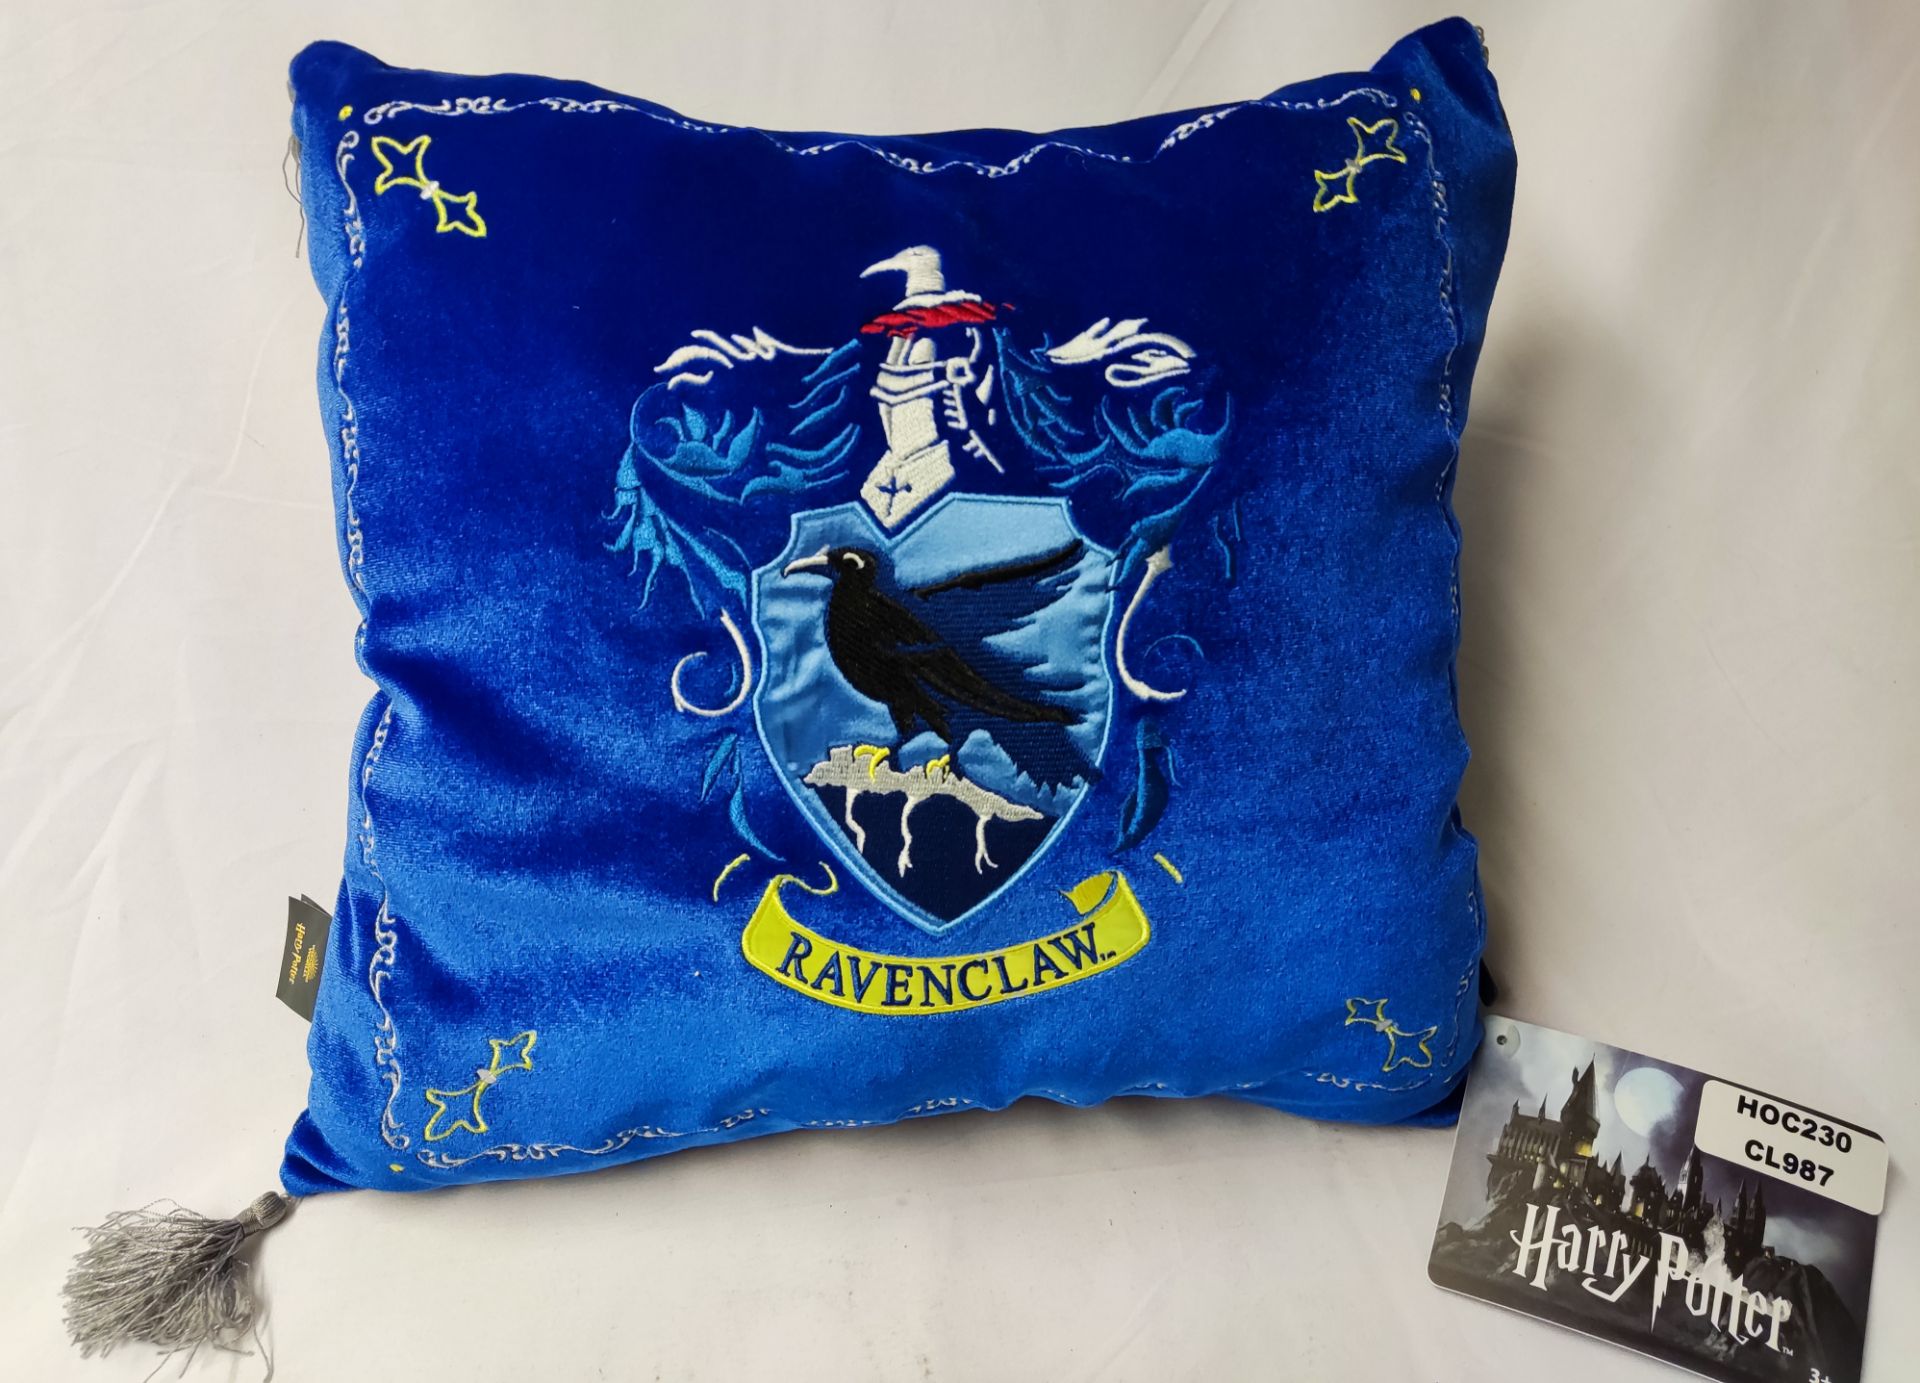 1 x NOBLE COLLECTION Harry Potter Ravenclaw House Mascot Cushion - New/Unused - RRP £39.95 - Ref: / - Image 9 of 11